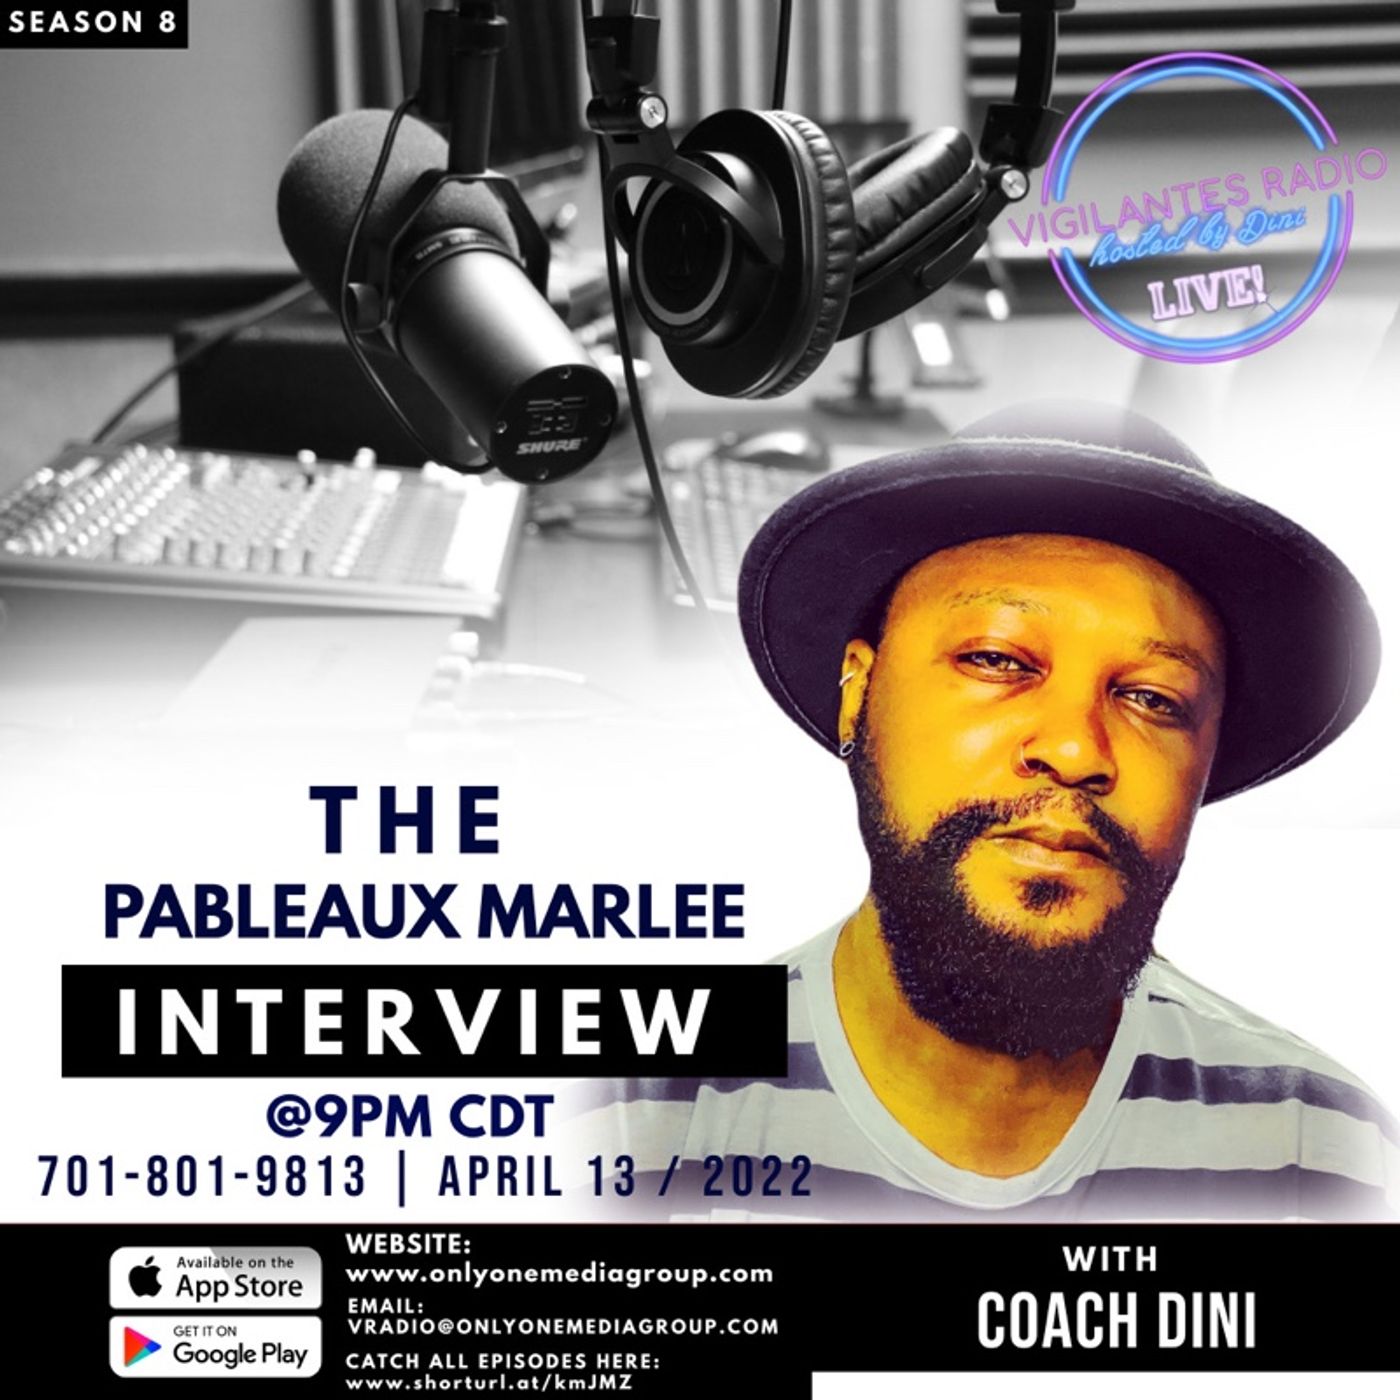 The Pableaux Marlee Interview. Image